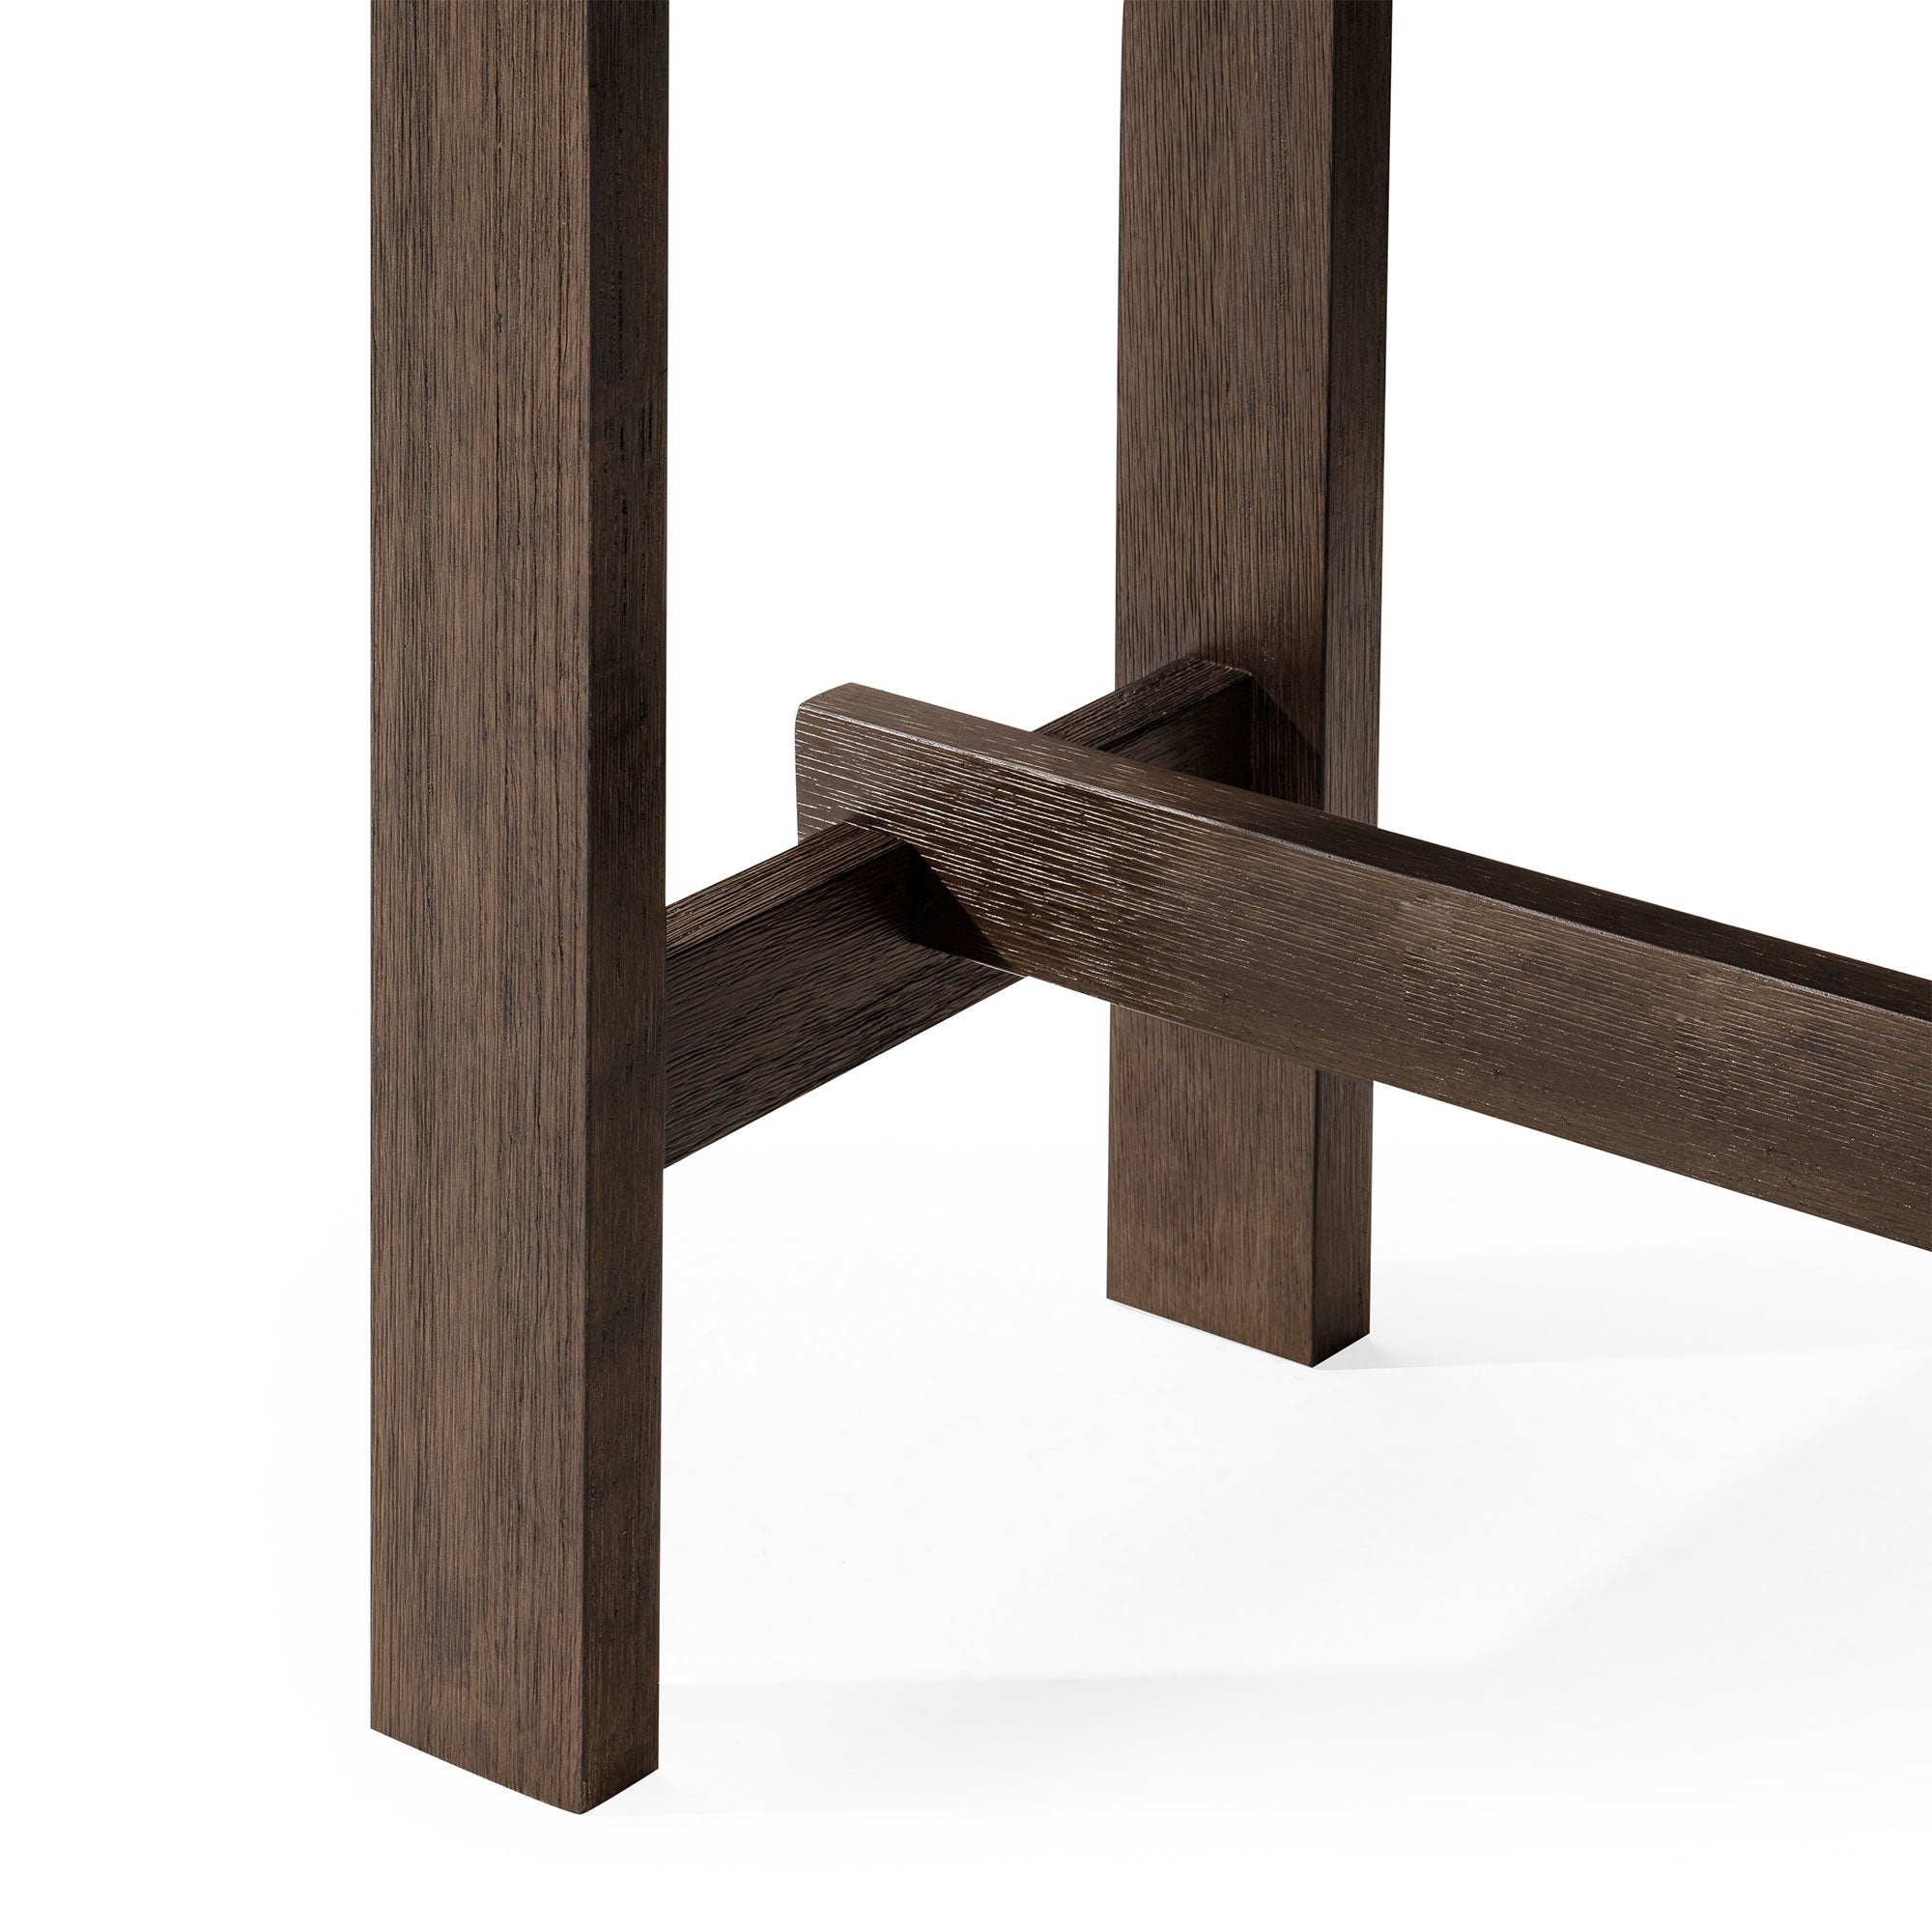 Hera Organic Wooden Console Table in Weathered Brown Finish in Accent Tables by Maven Lane